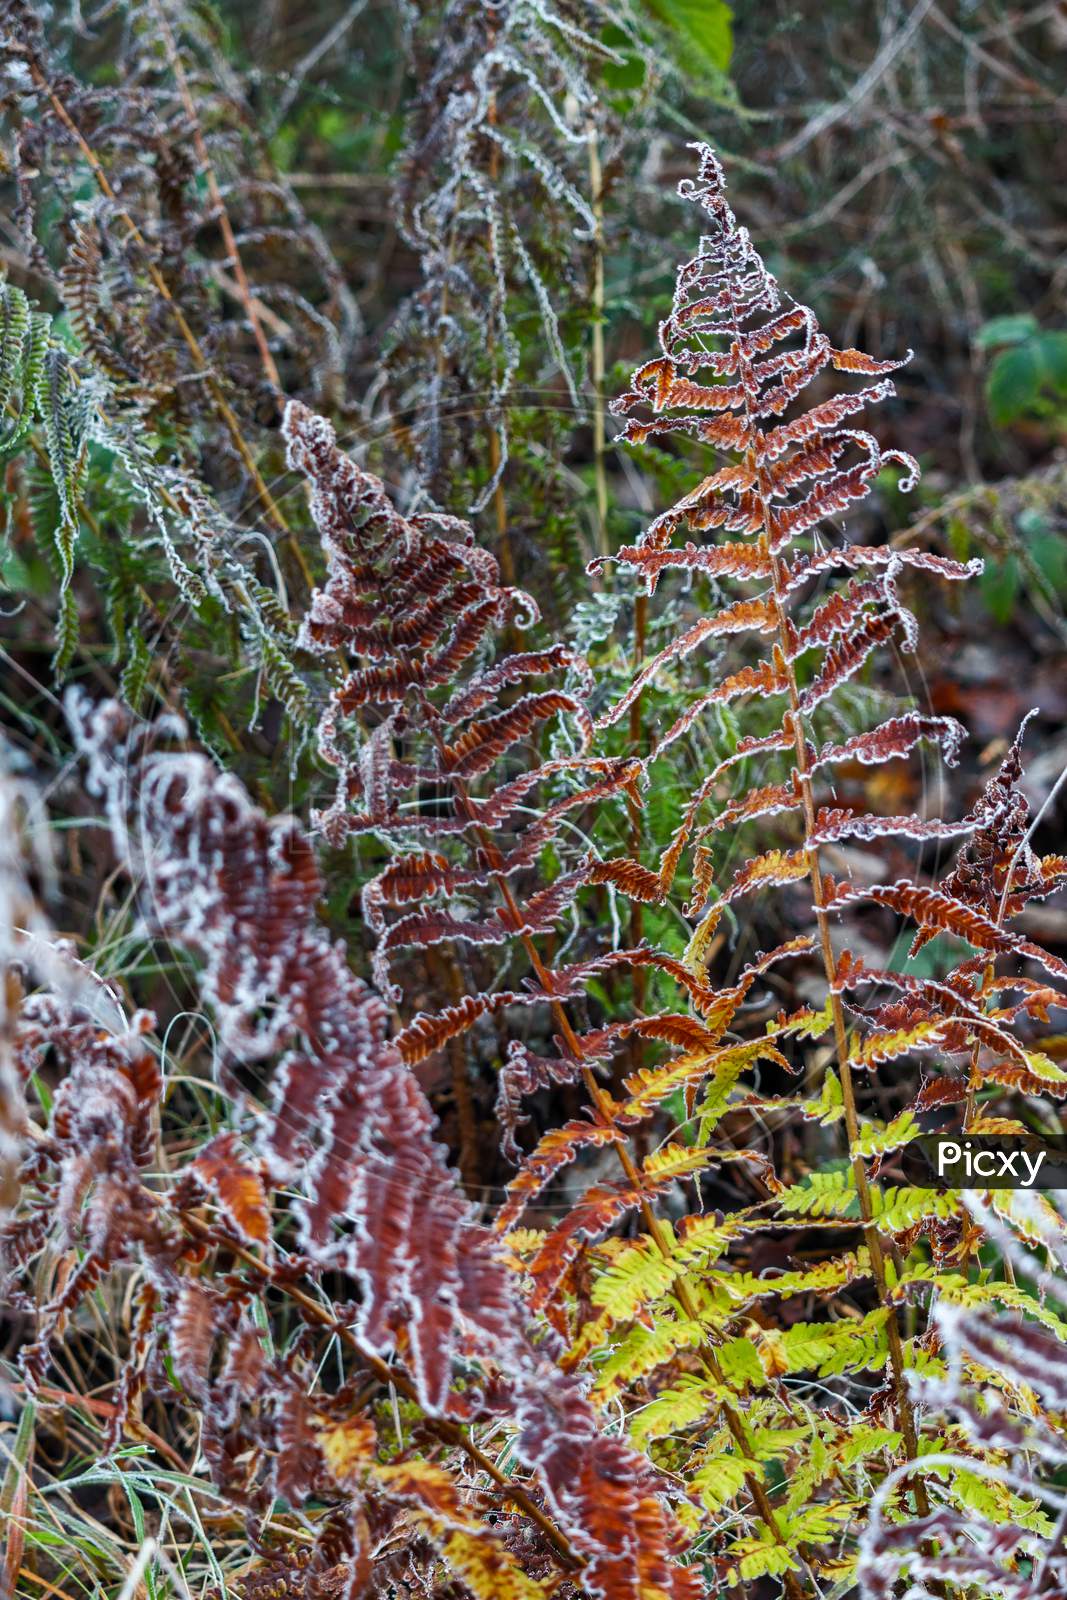 Colourful Decaying Fern Covered With Hoar Frost On A Winters Day